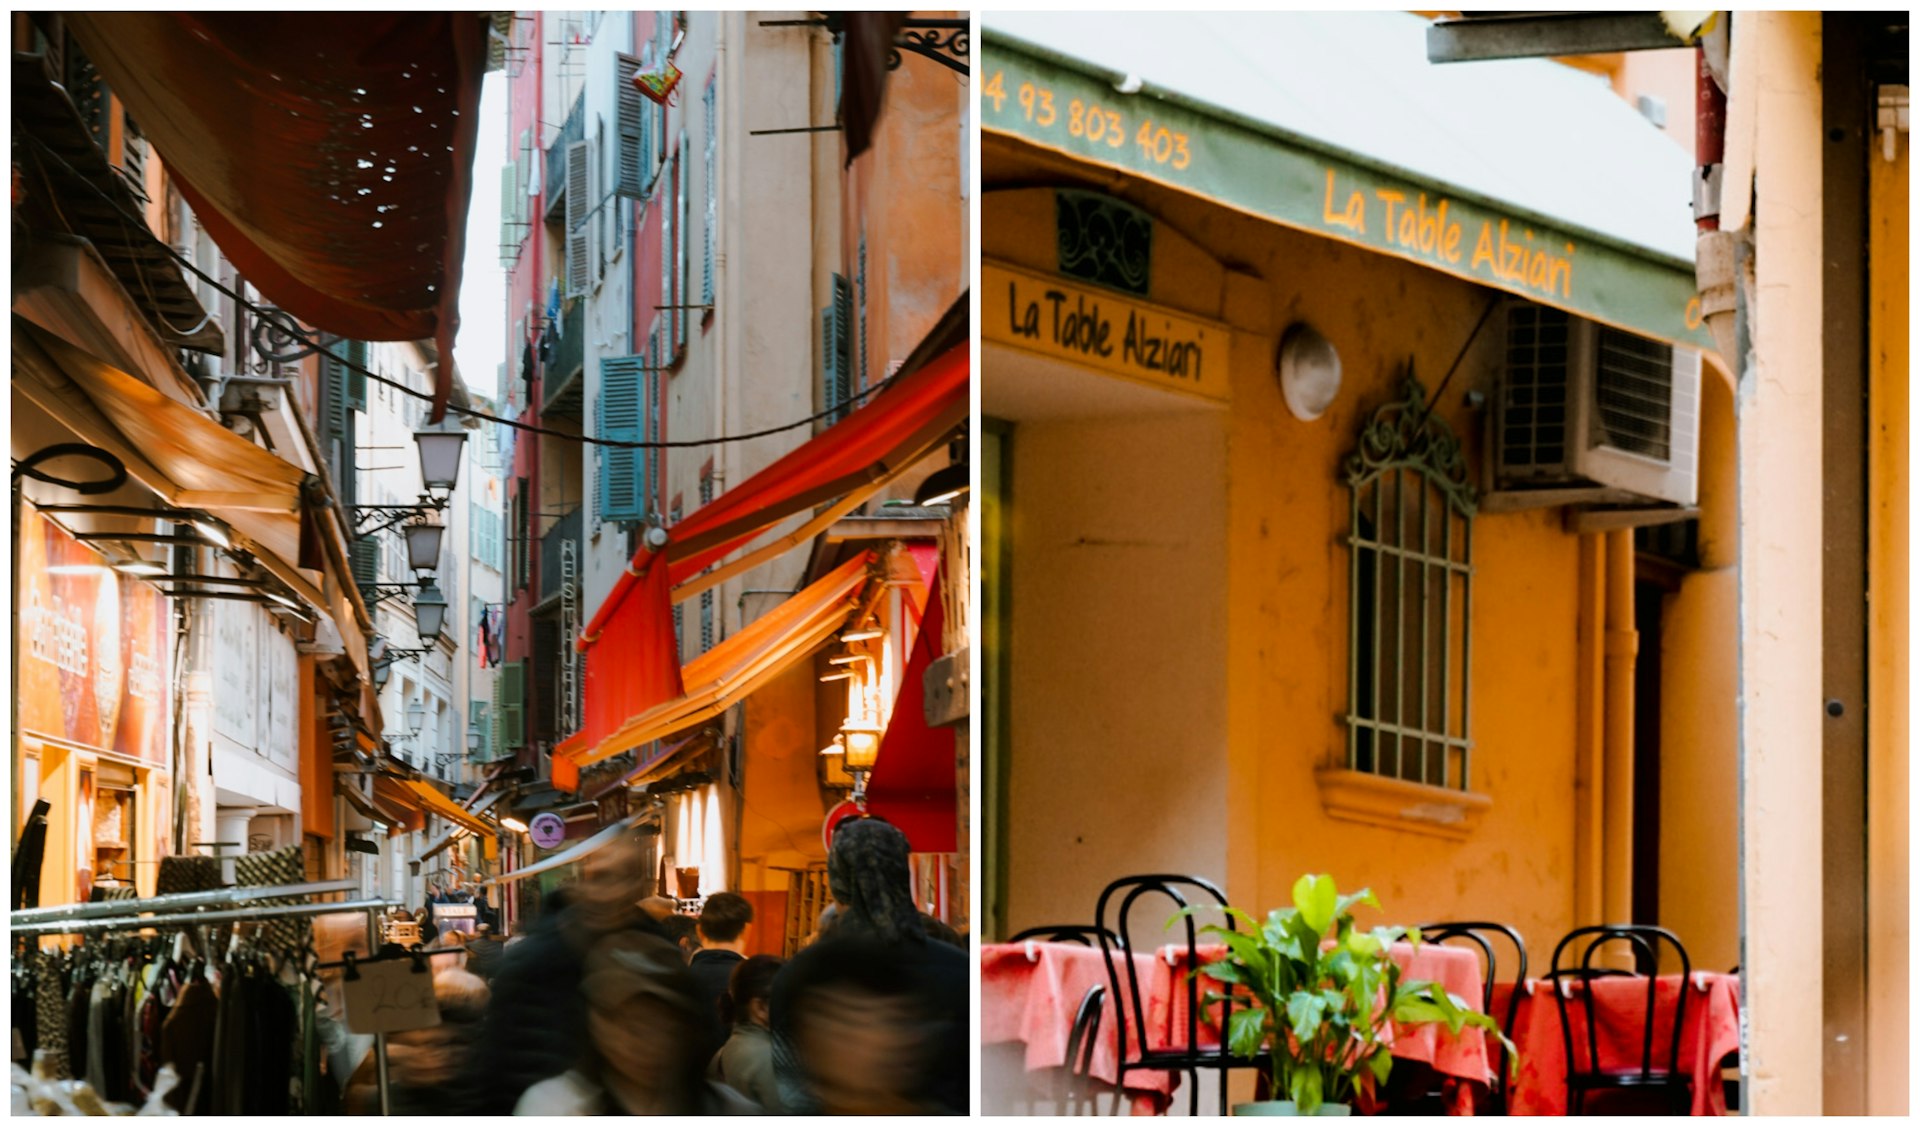 L: A narrow street in Nice. R: A close-up of a restaurant terrace in Nice